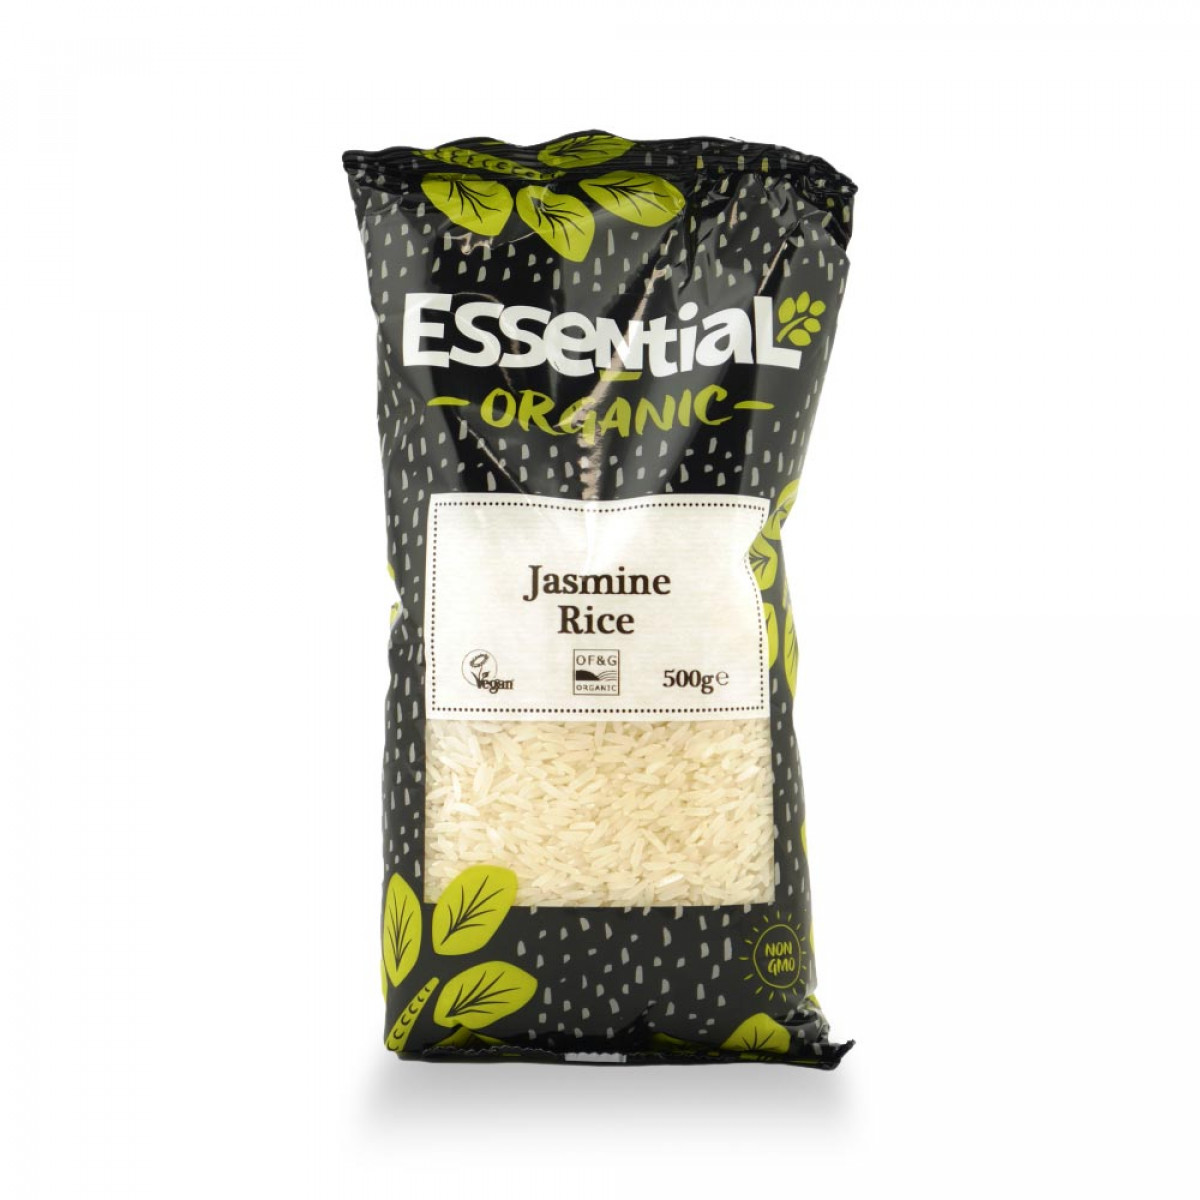 Product picture for Jasmine White Rice